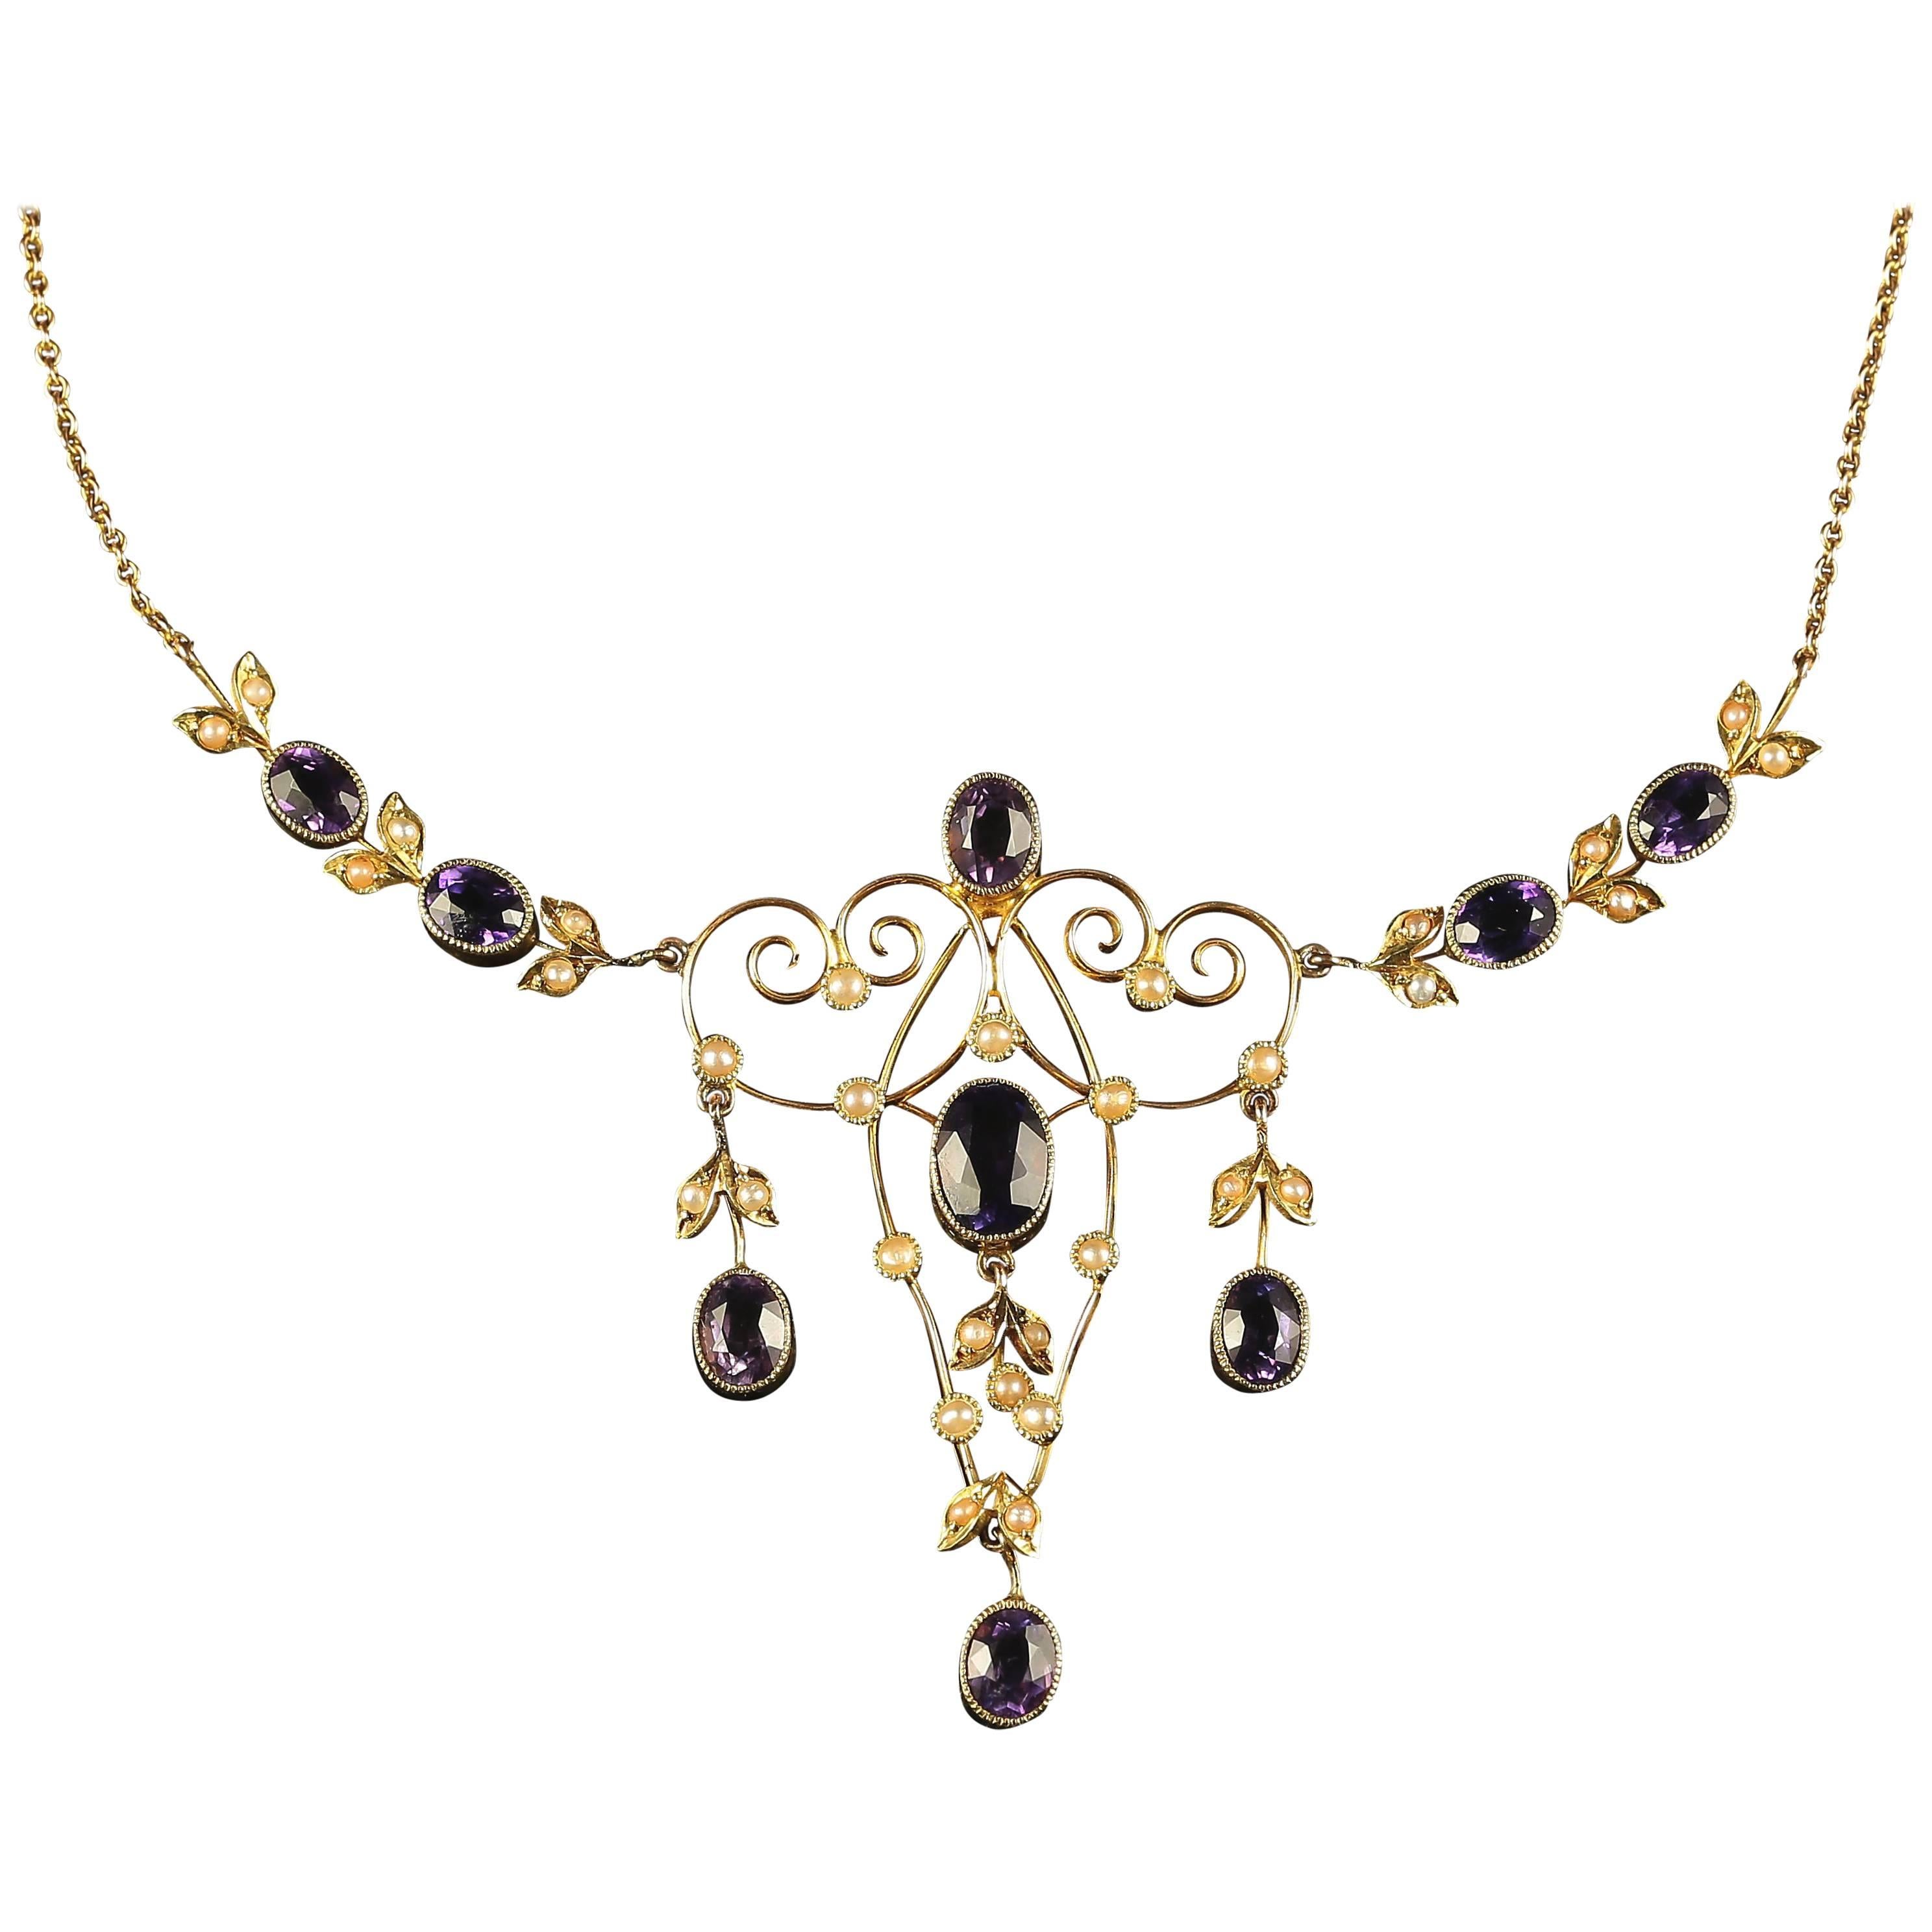 Antique Edwardian Amethyst Pearl Gold Garland Necklace 